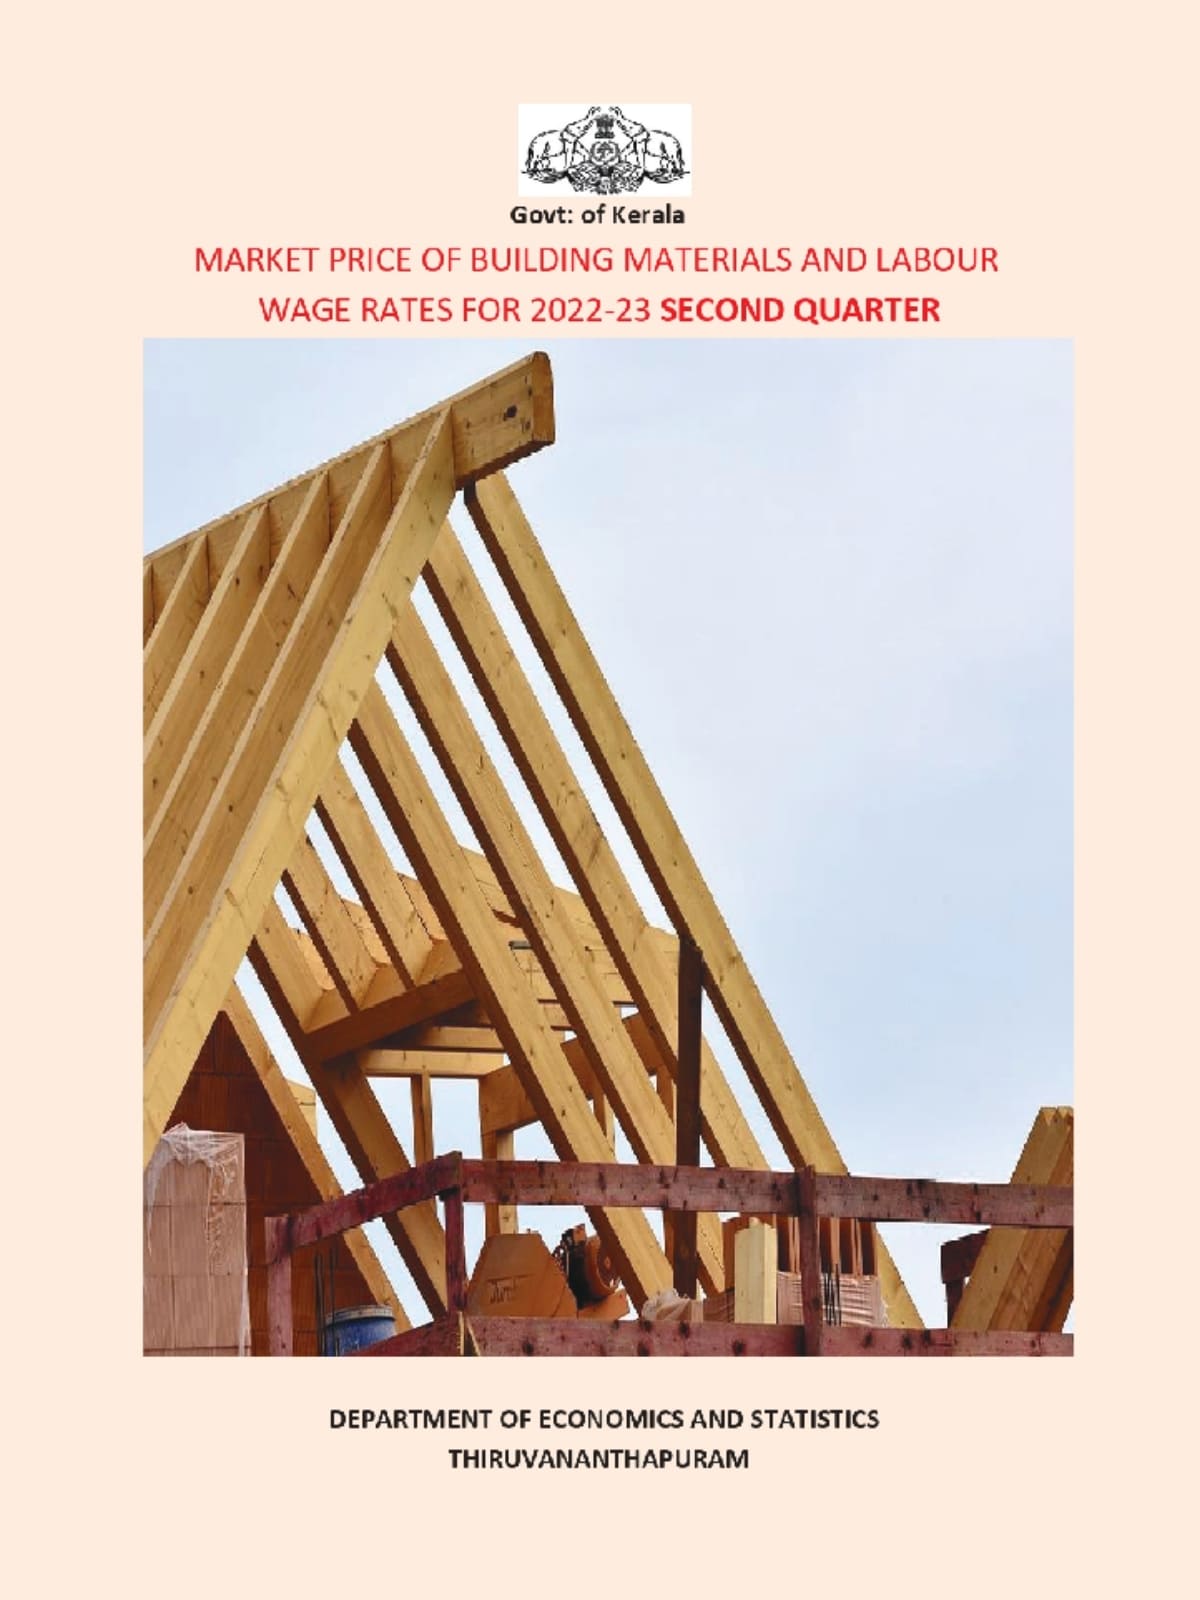 Market Price of Building Materials and Labour wage rates for 2022-23 Second quarter